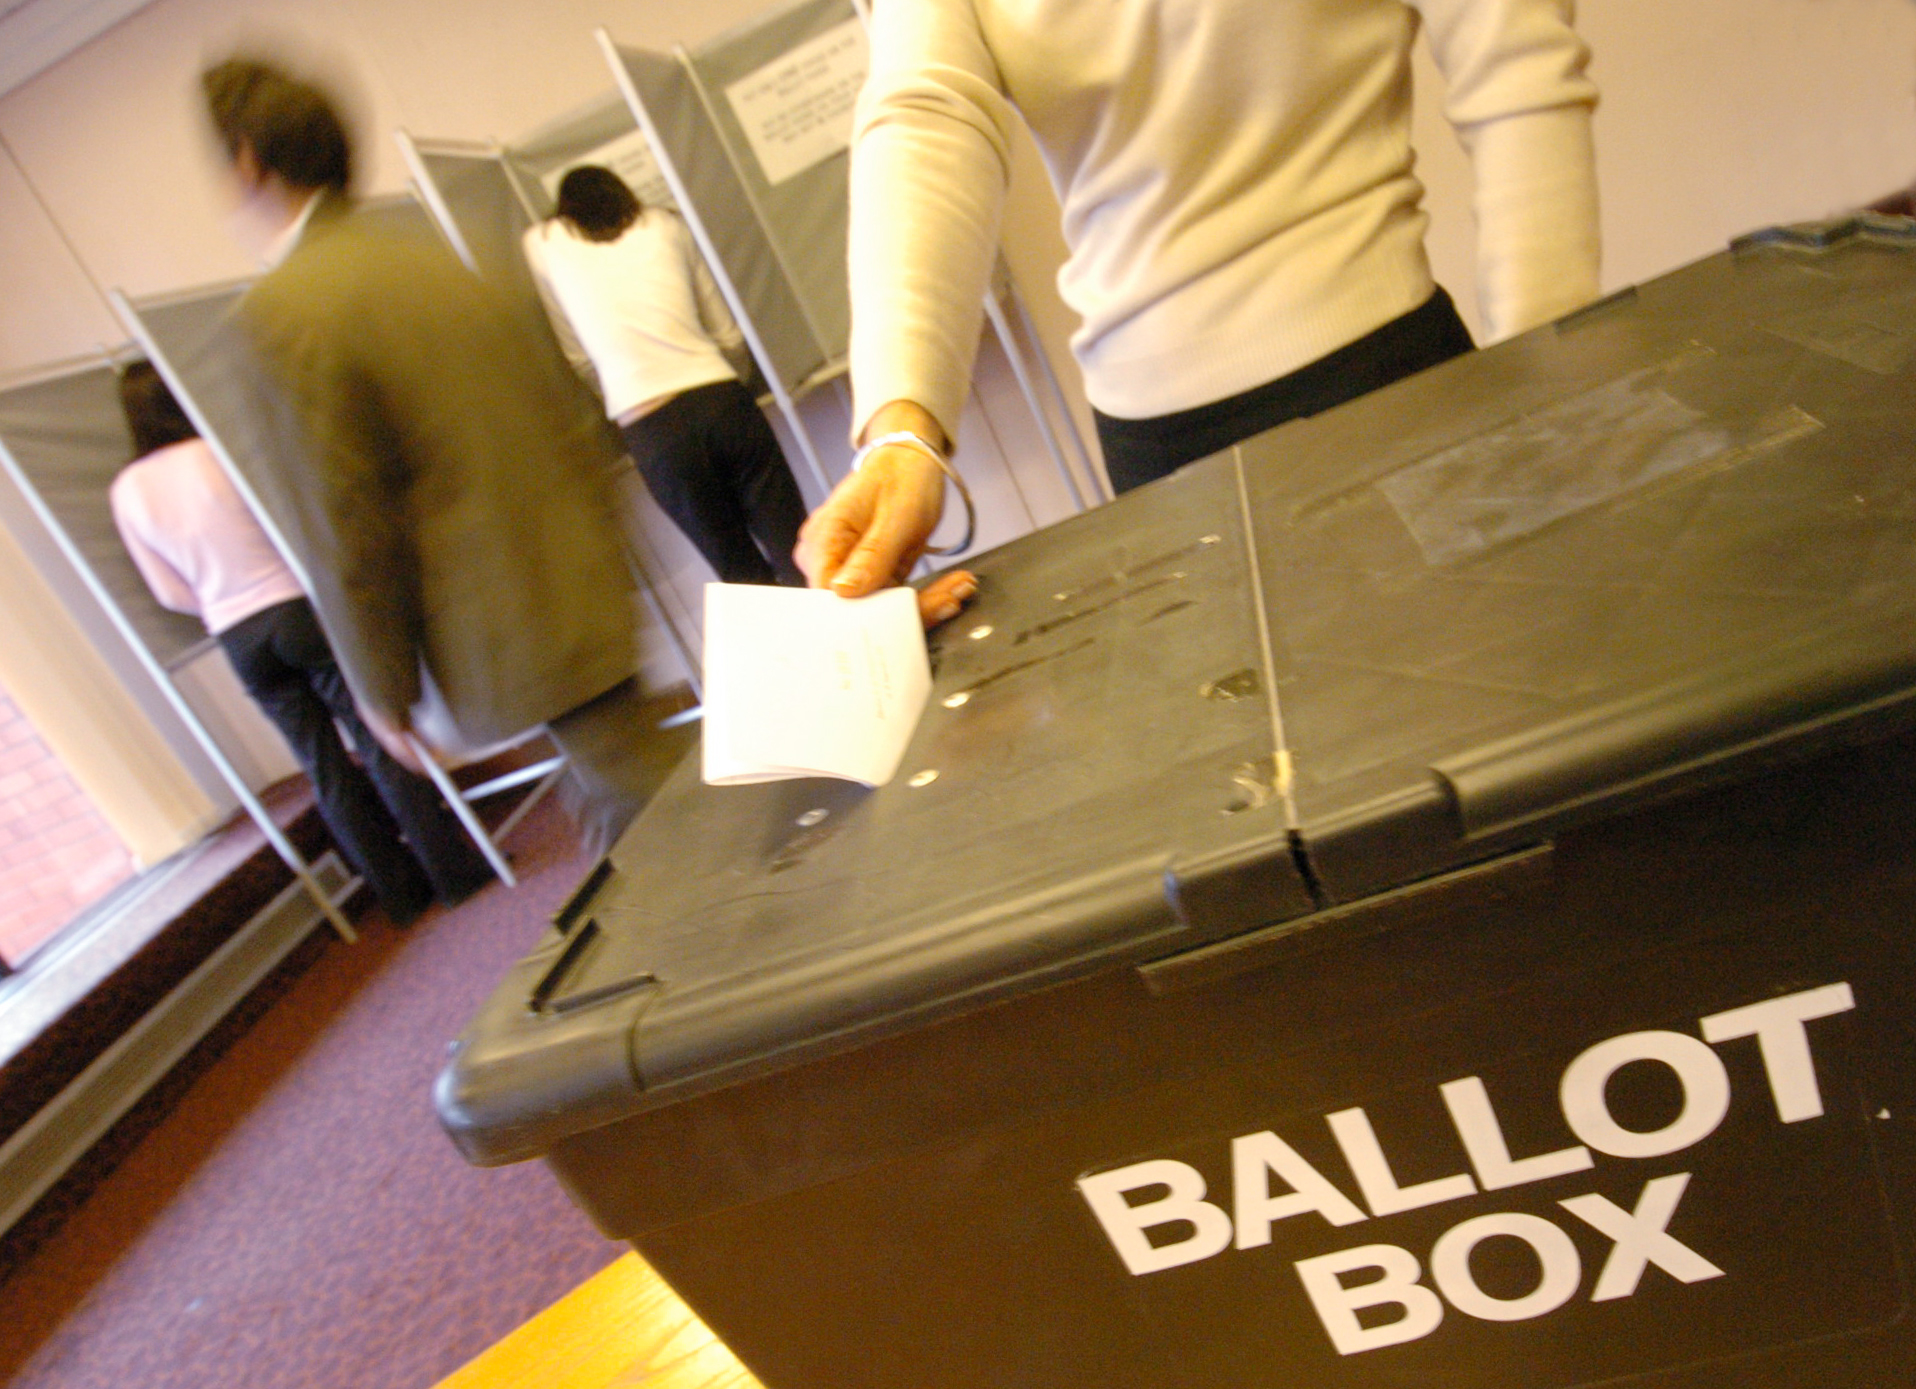 Woman placing vote in ballot box at election